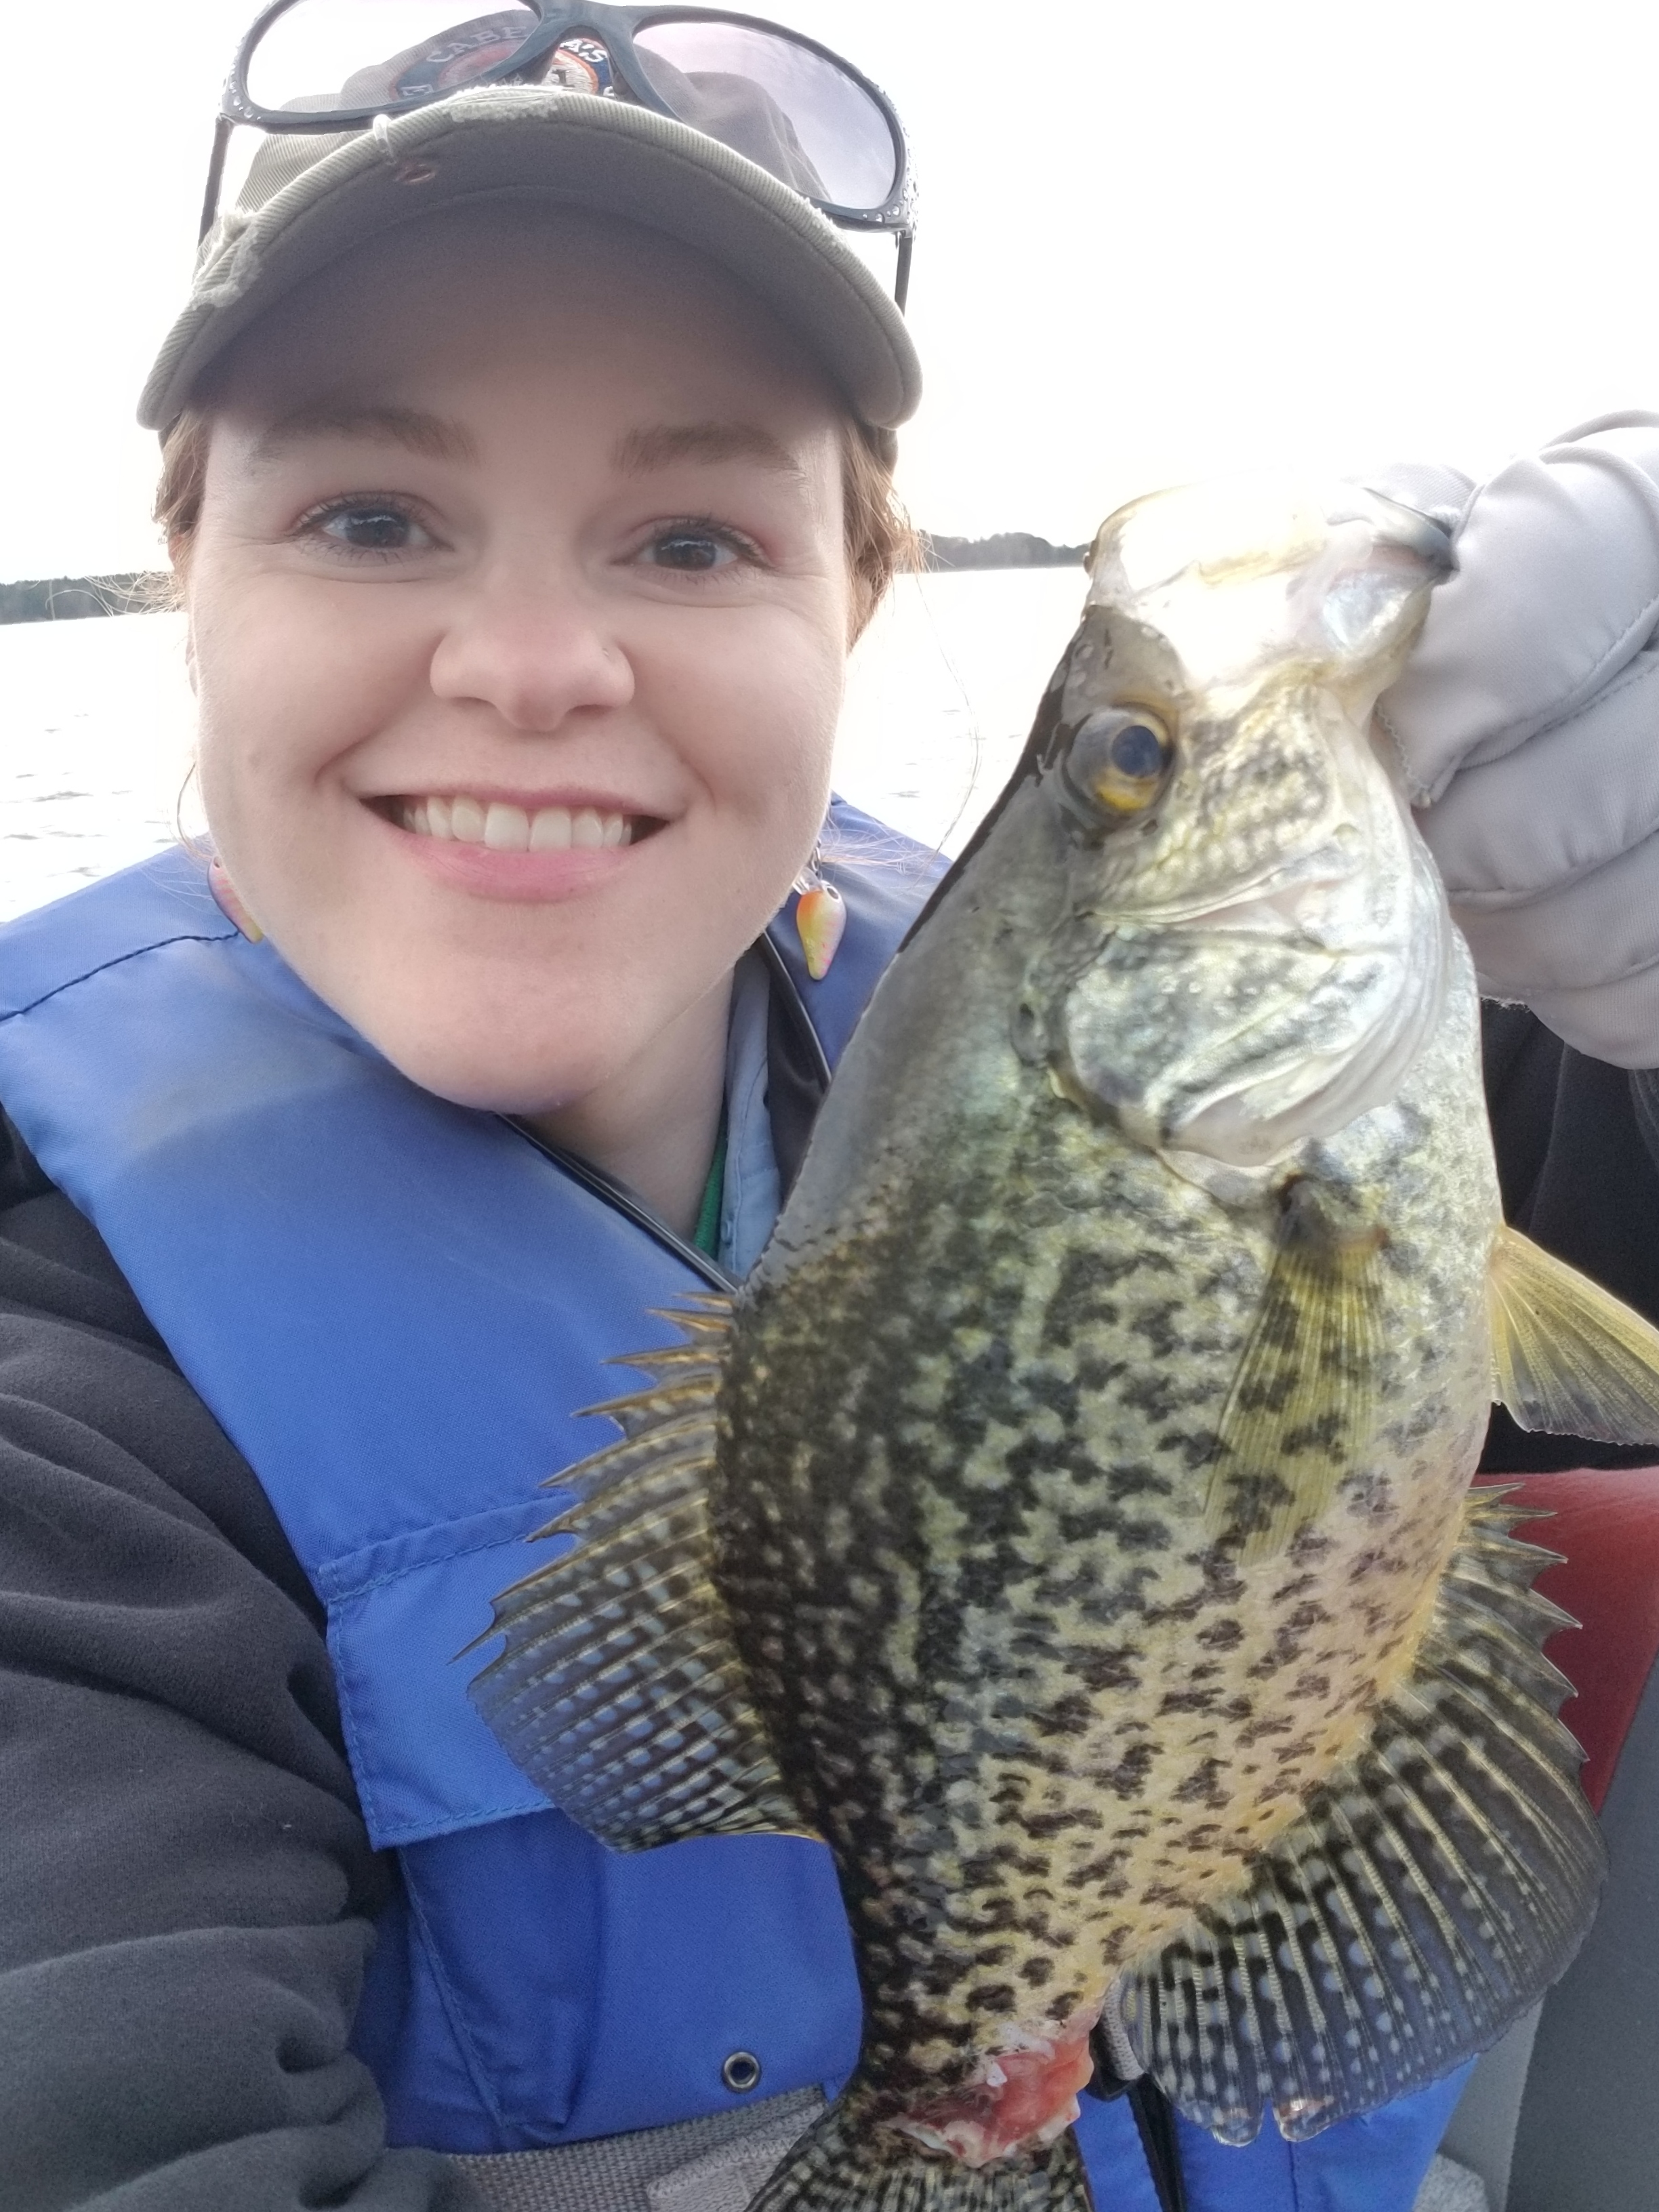 Cold Front Crappies - General Discussion Forum - General Discussion Forum